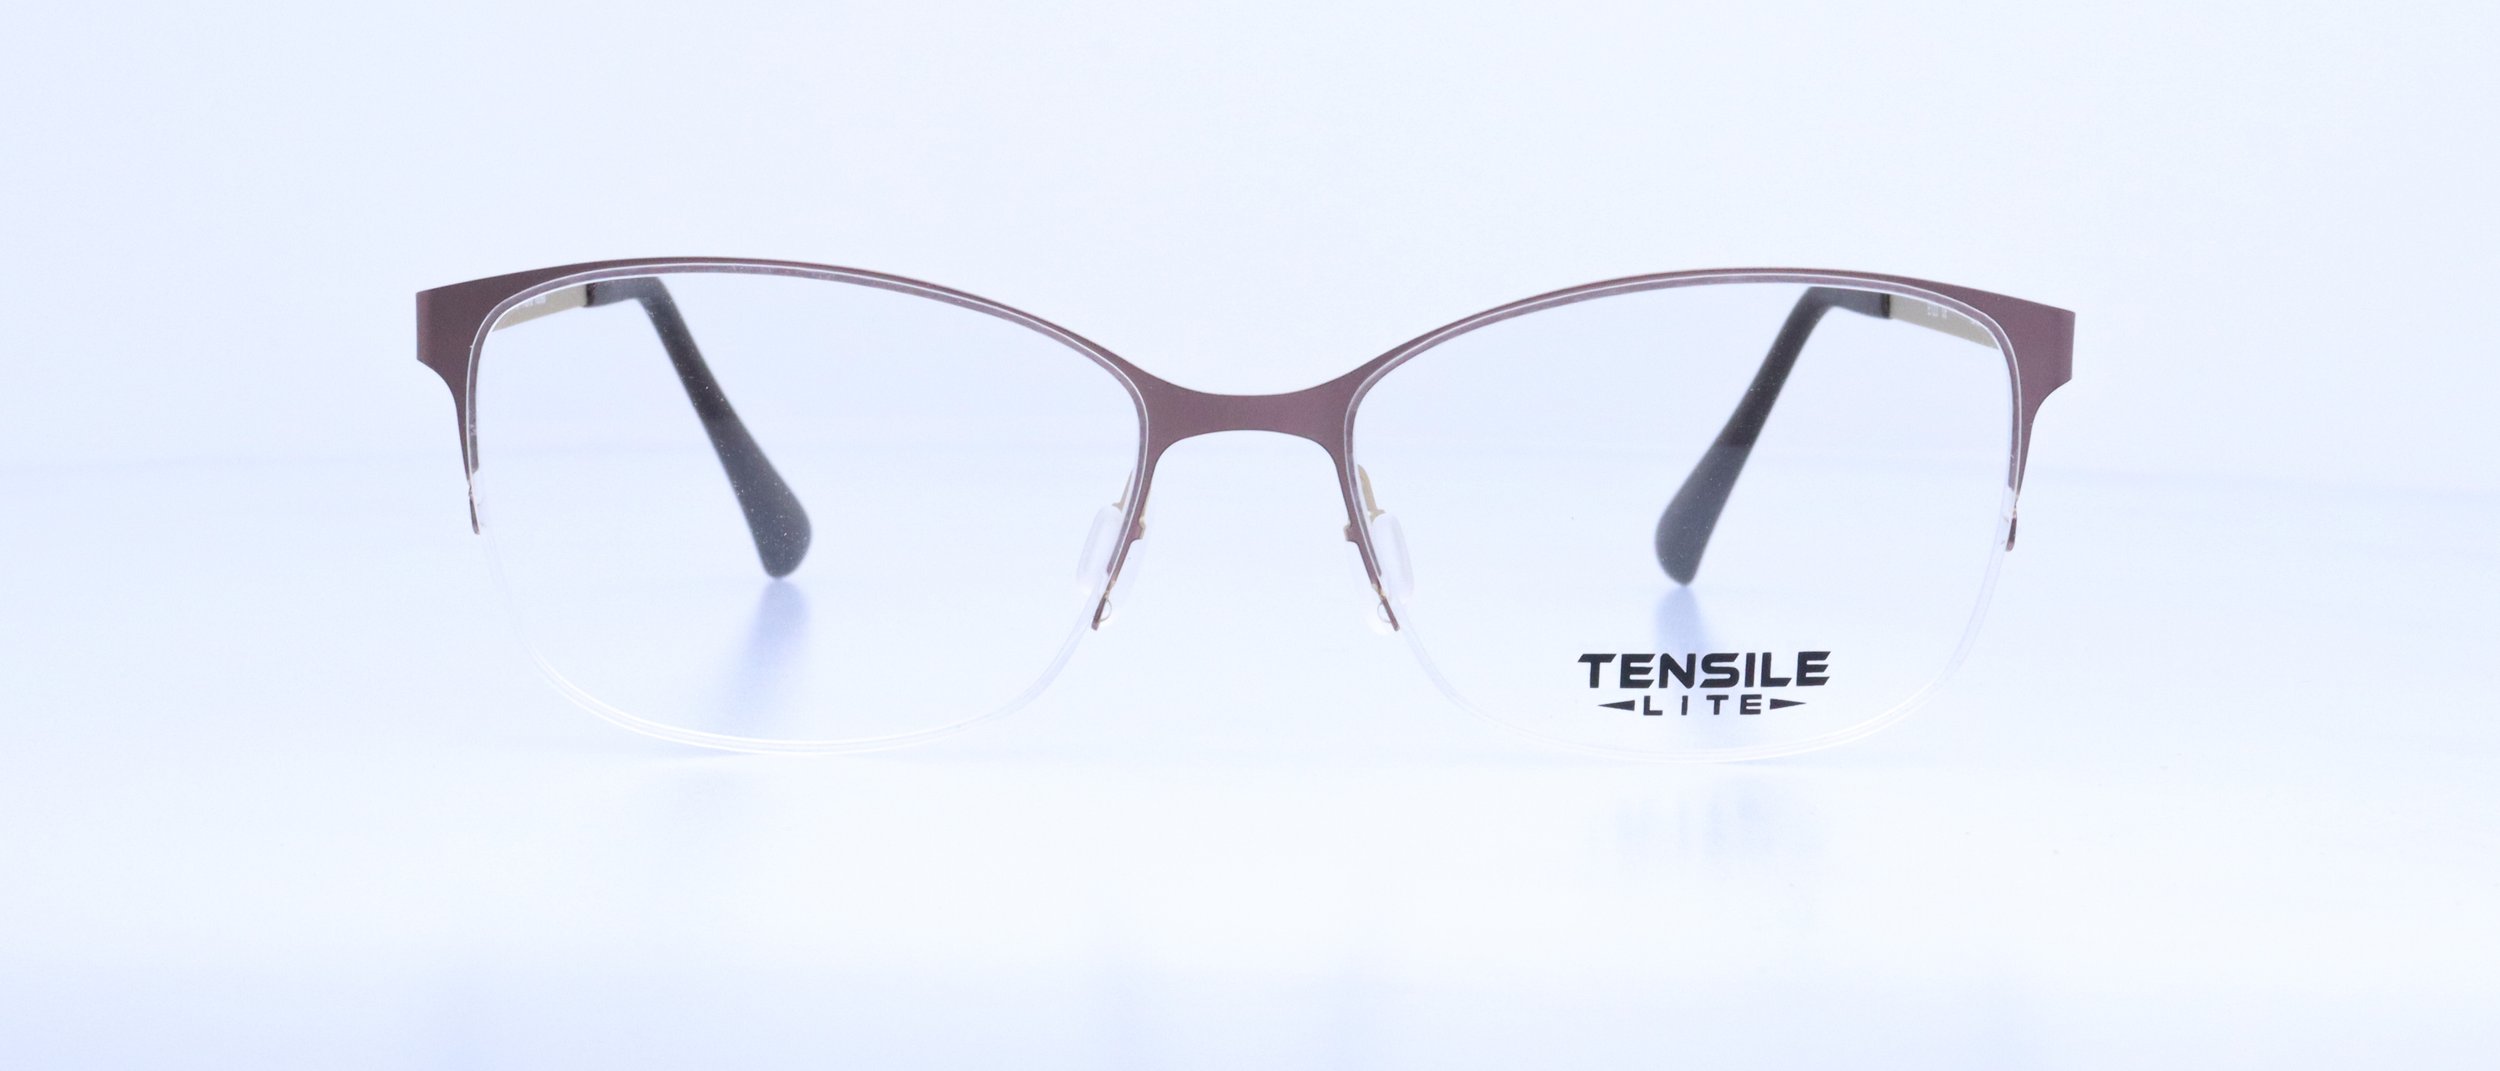  NEW!!! TL725: 54-16-140, Available in Mauve/Gold or Black/Gold 